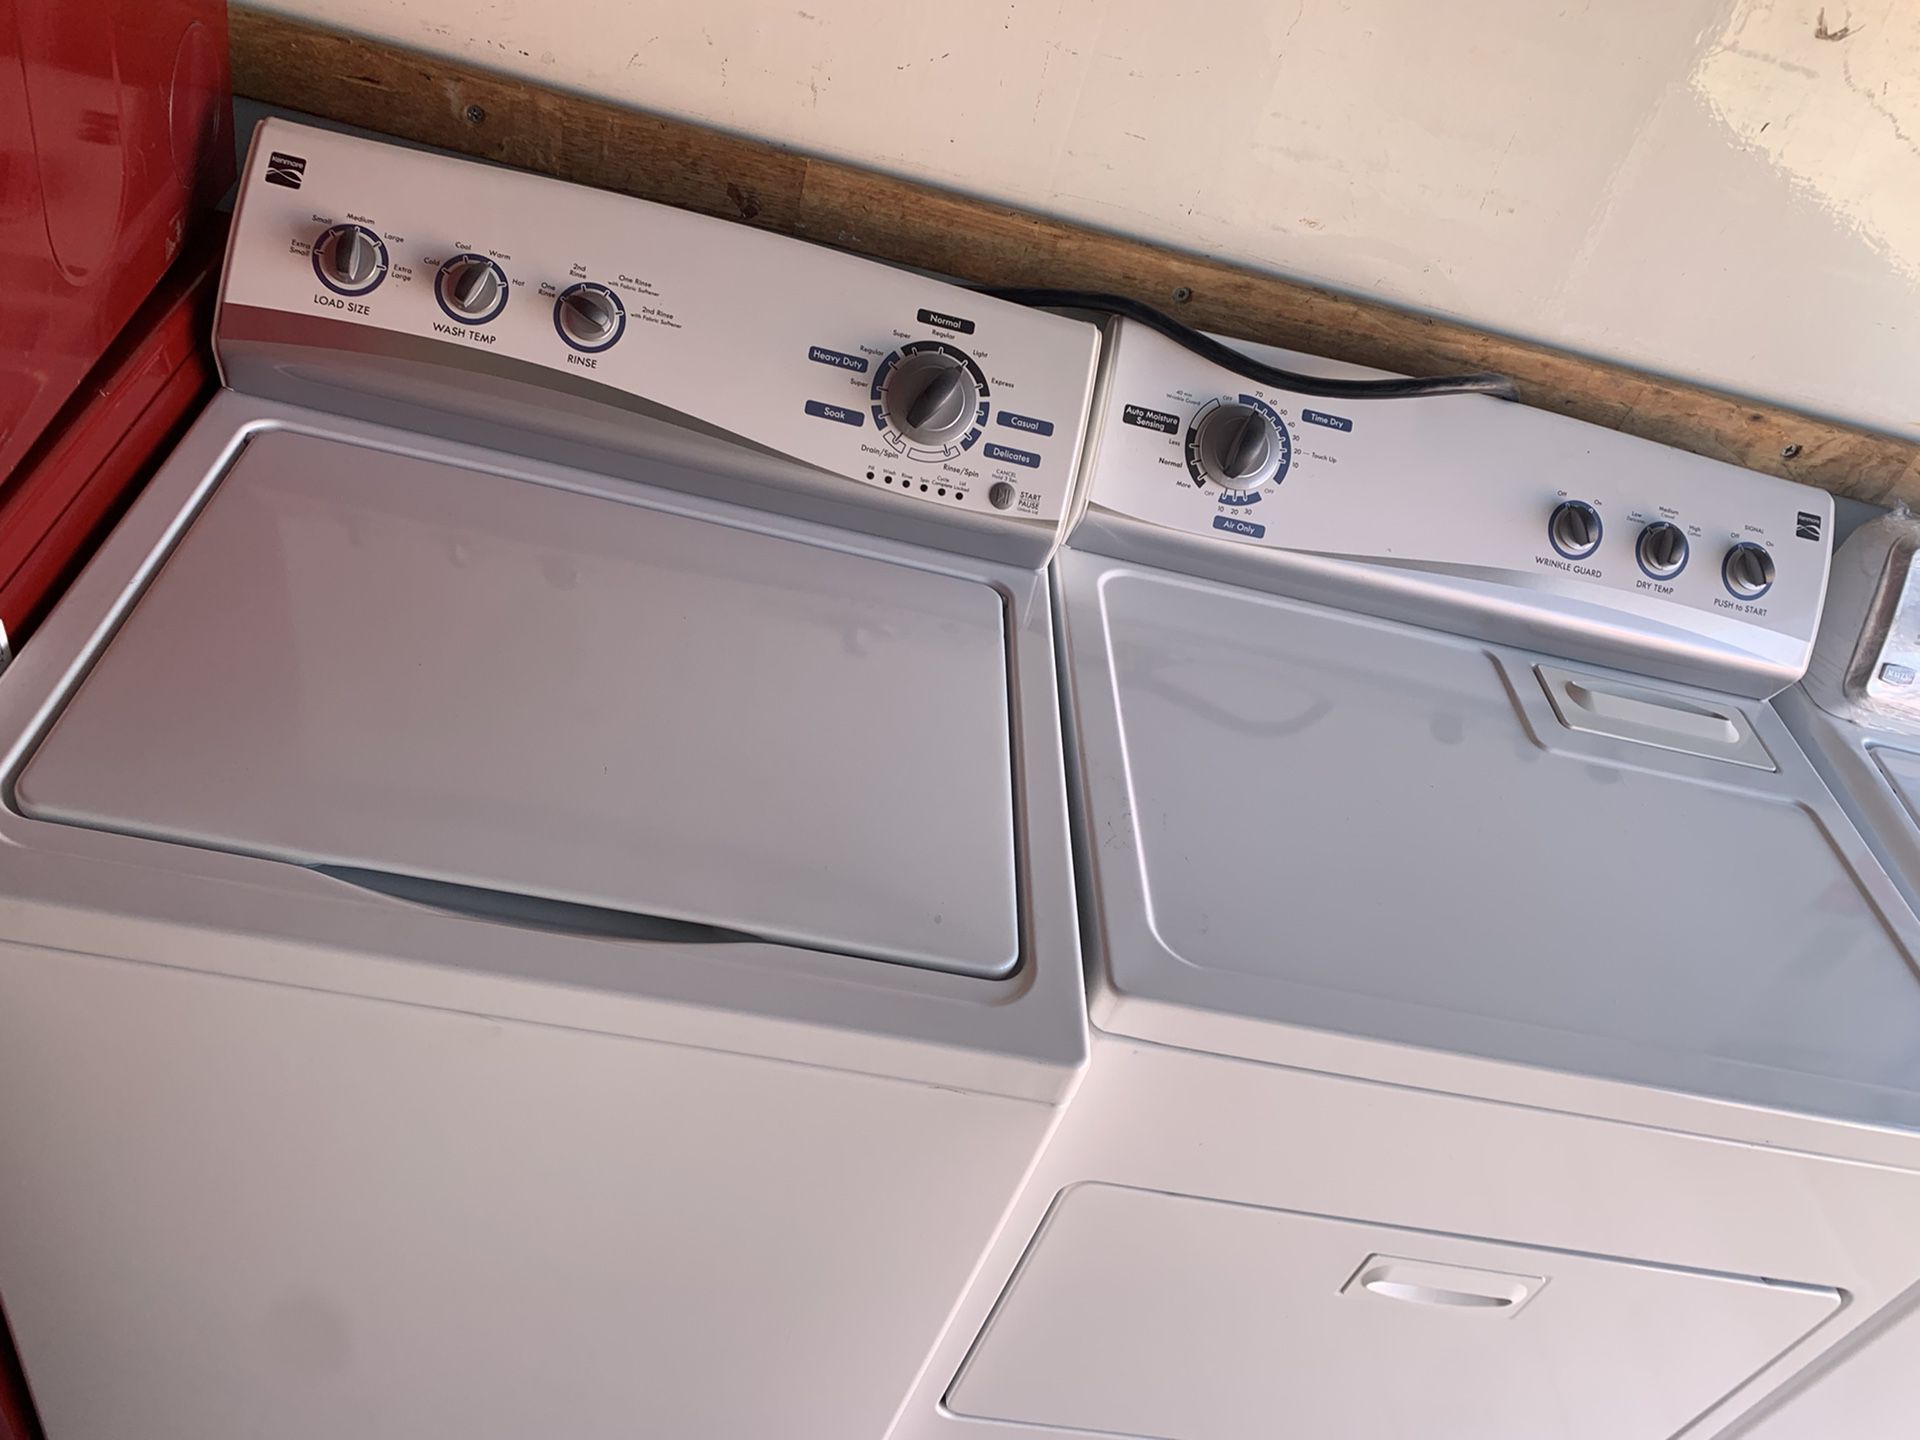 Kenmore Topload Washer Dryer